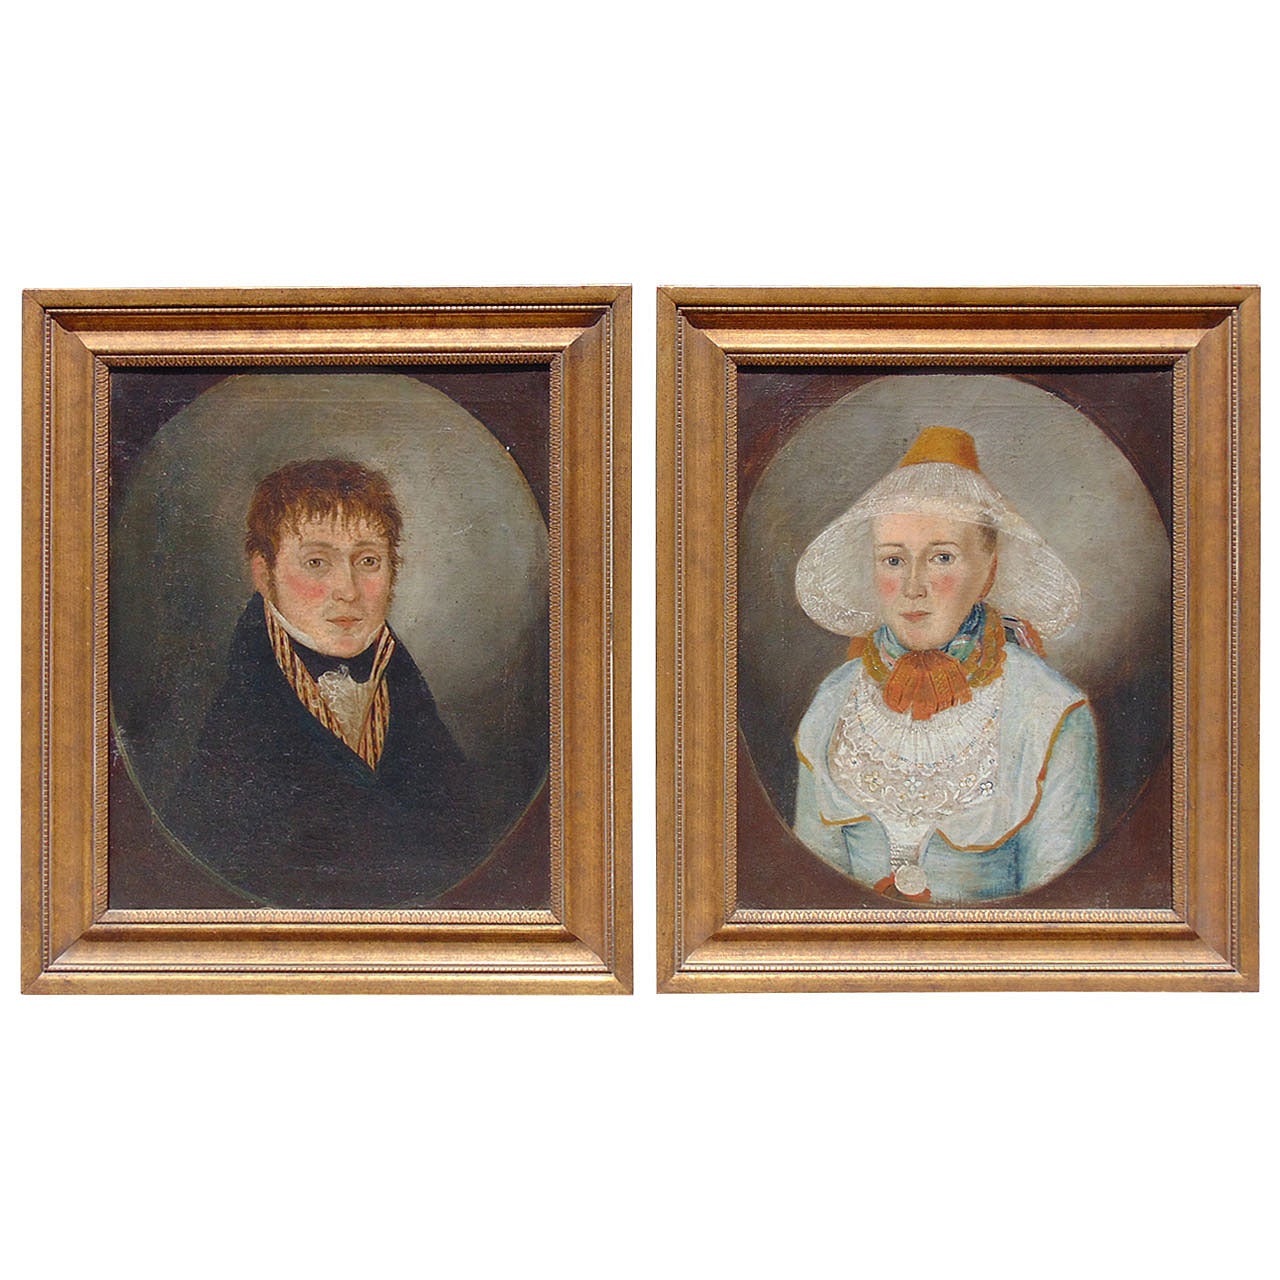 Pair of Period French Provincial Directoire Portraits, Late 18th Century